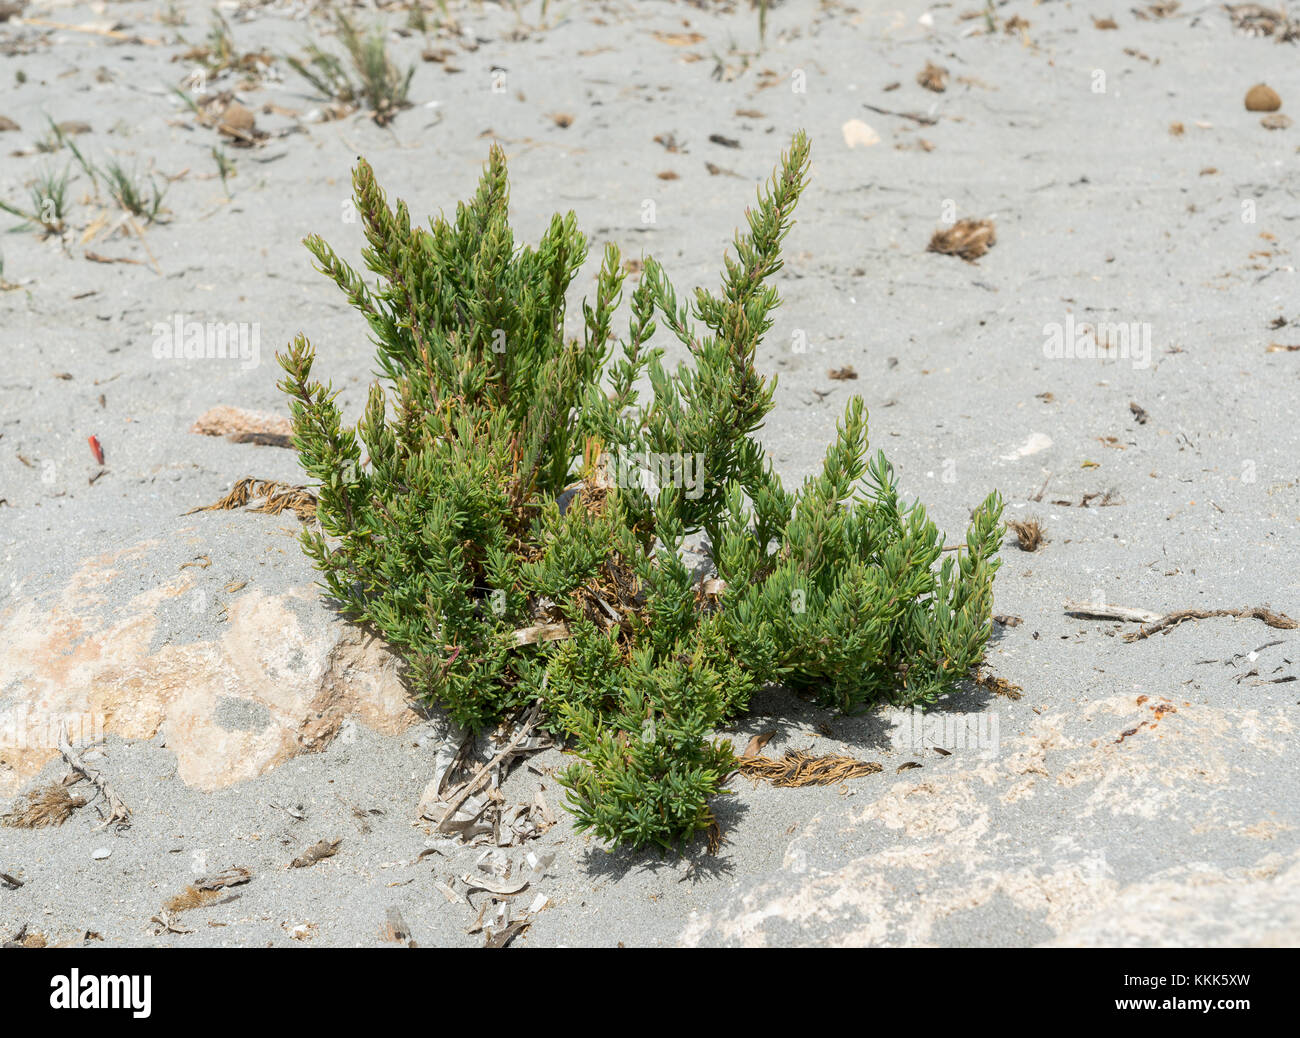 Close-up of the seepweed, Suaeda spicata. It is a Mediterranean plant that grows in saline soils and floodable buckets of the rocky coastline. Stock Photo